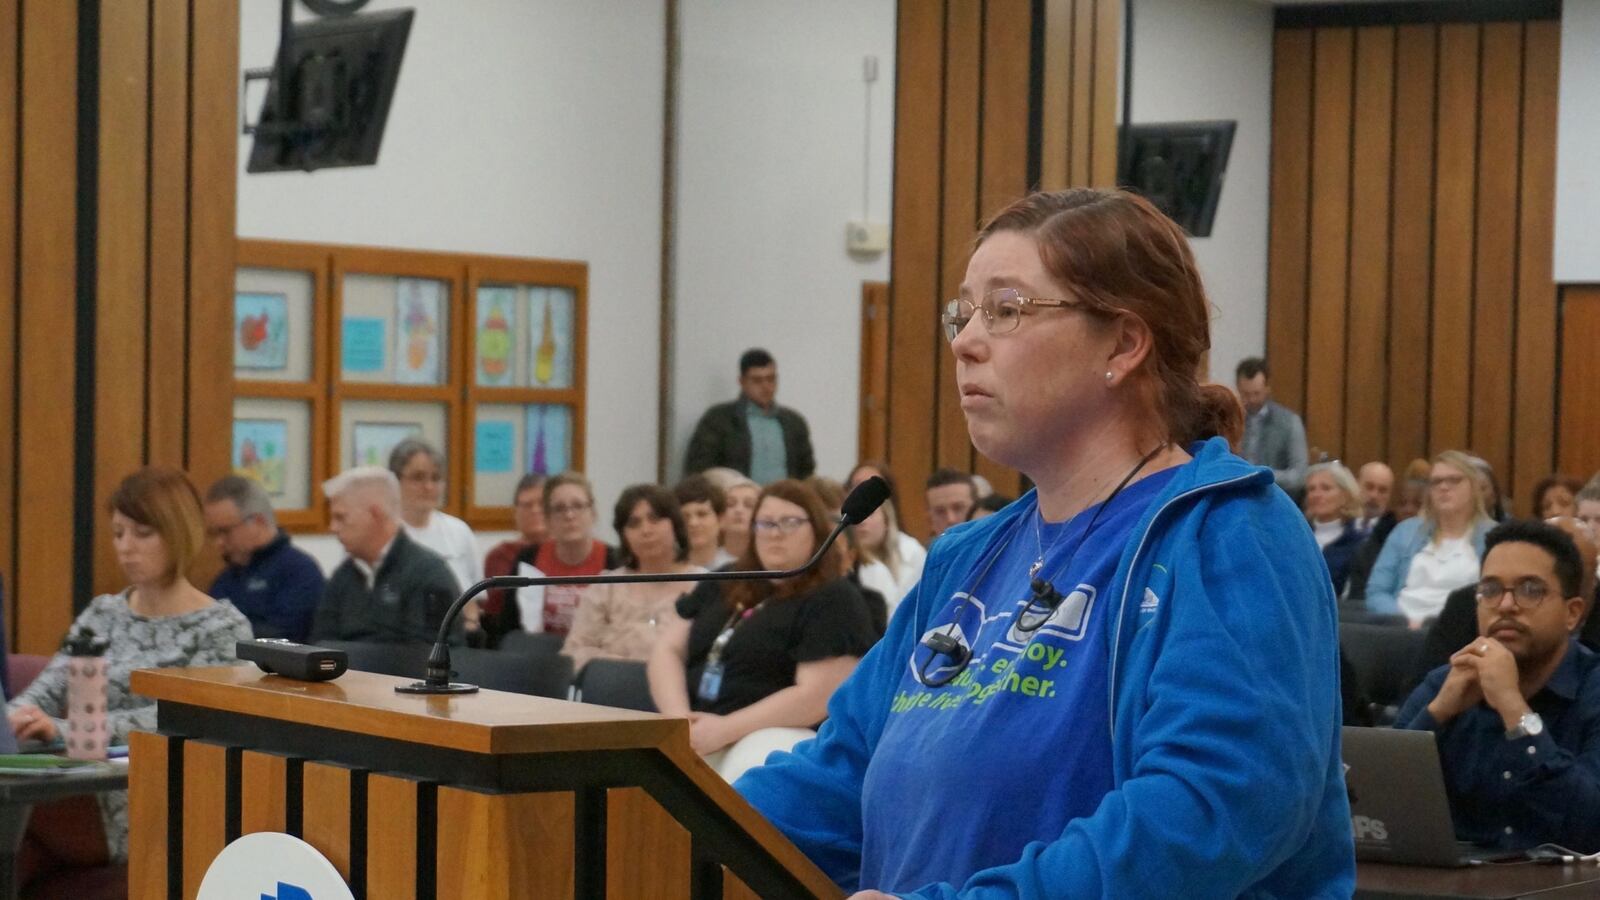 Christina Brown was one of several parents from School 67 who asked the board to keep the current educators.